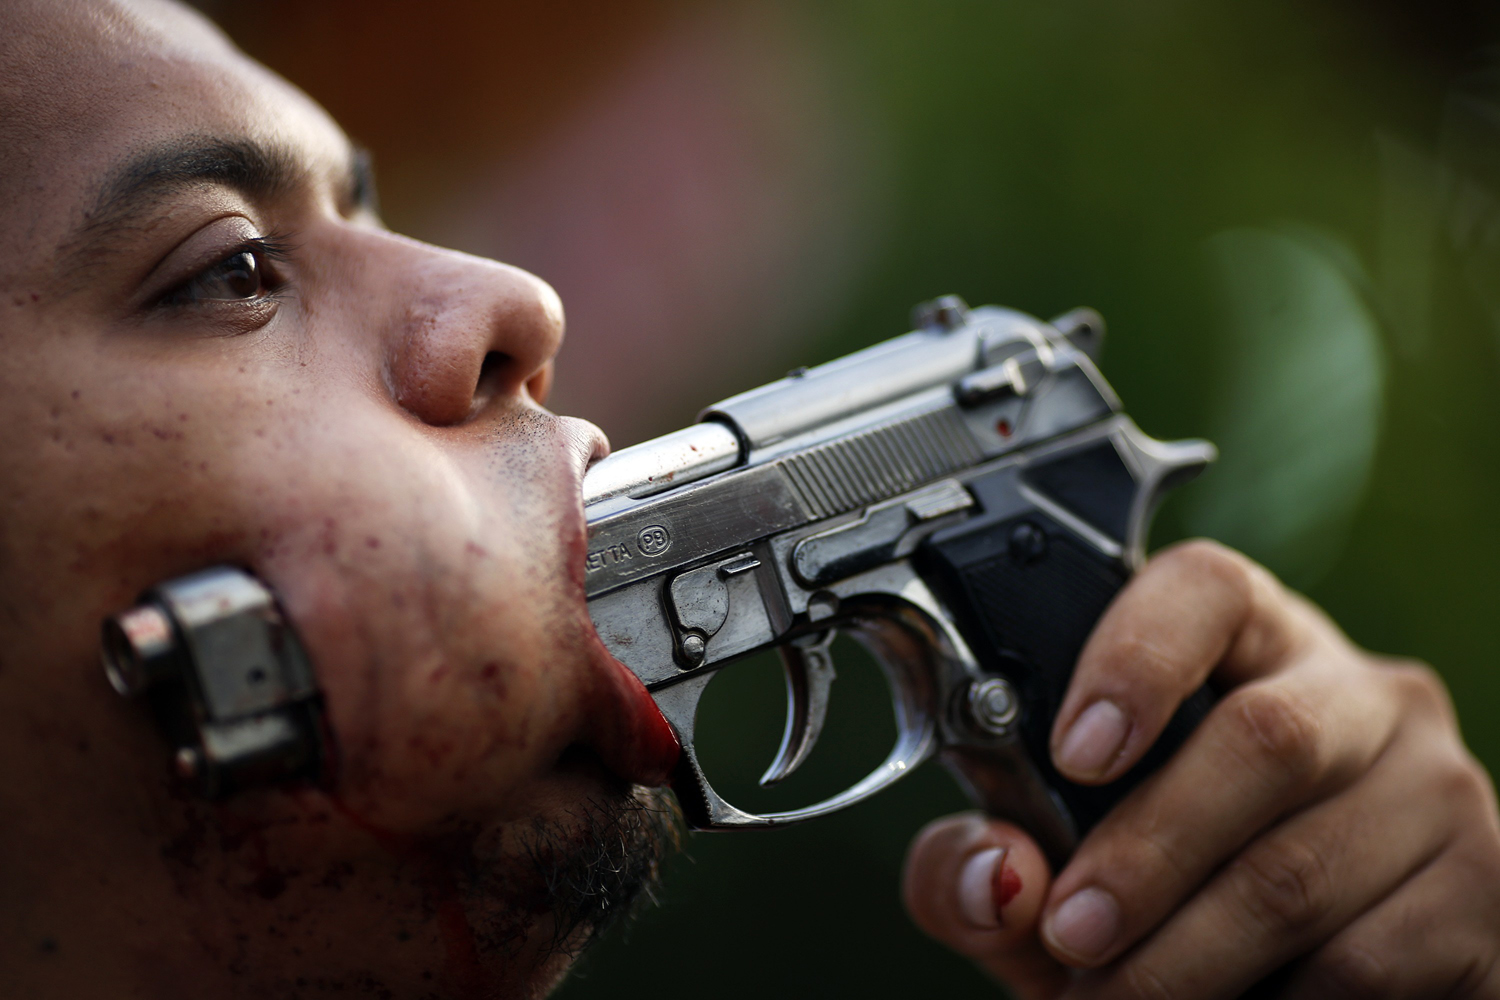 Image: Oct. 19, 2012. A devotee of the Ban Tha Rua Chinese shrine with a gun pierced through his cheek takes part in a procession celebrating the annual vegetarian festival in Phuket, Thailand. The festival celebrates the local Chinese community's belief that abstinence from meat and various stimulants during the ninth lunar month of the Chinese calendar will help them obtain good health and peace of mind.